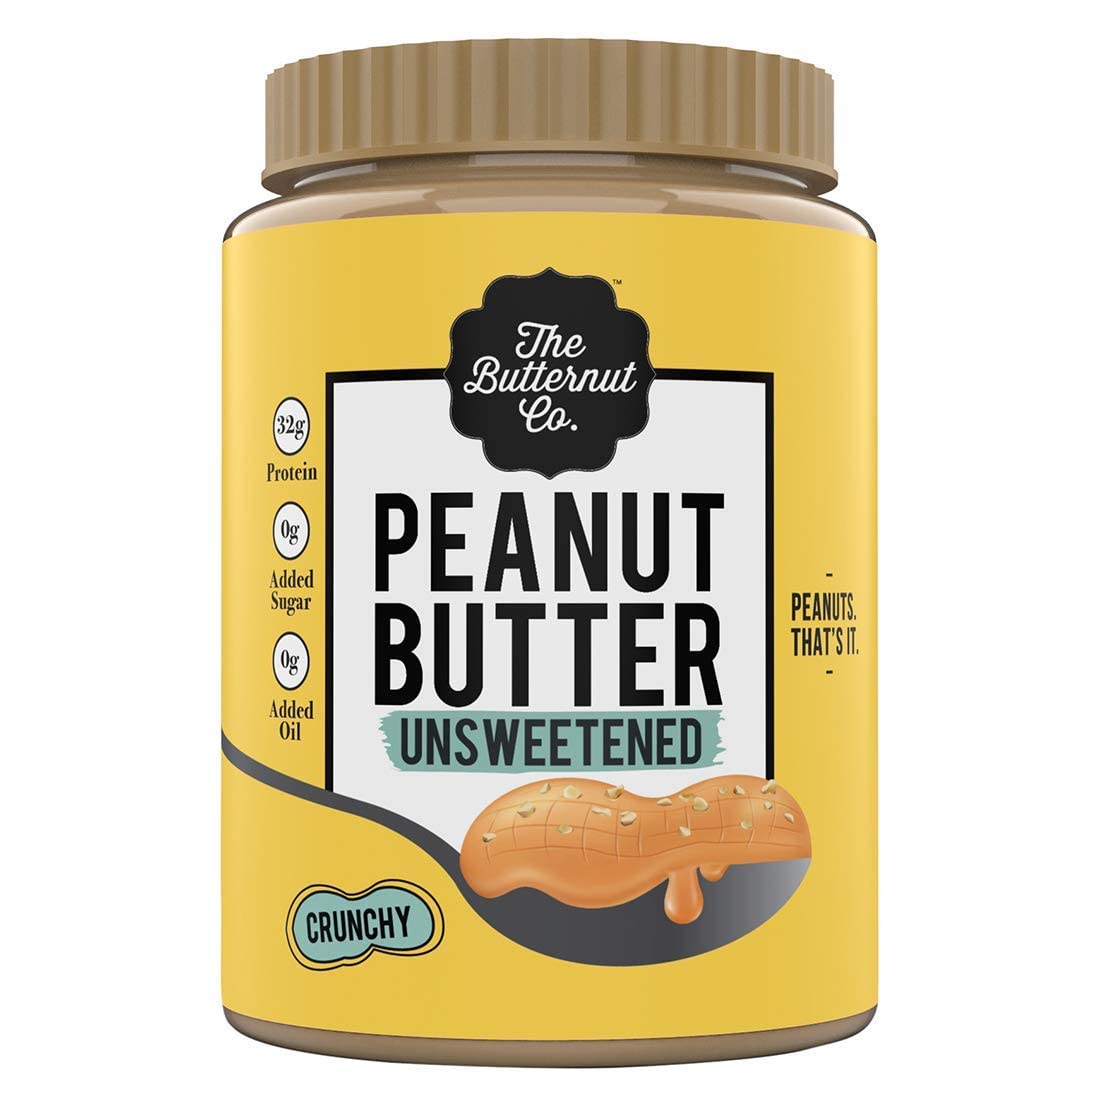 The Butternut Co. Natural Peanut Butter (Crunchy) 1kg | PACK OF 4 | Unsweetened | 32g Protein | No Added Sugar | 100% Peanuts | No Salt | High Protein Peanut Butter | Vegan